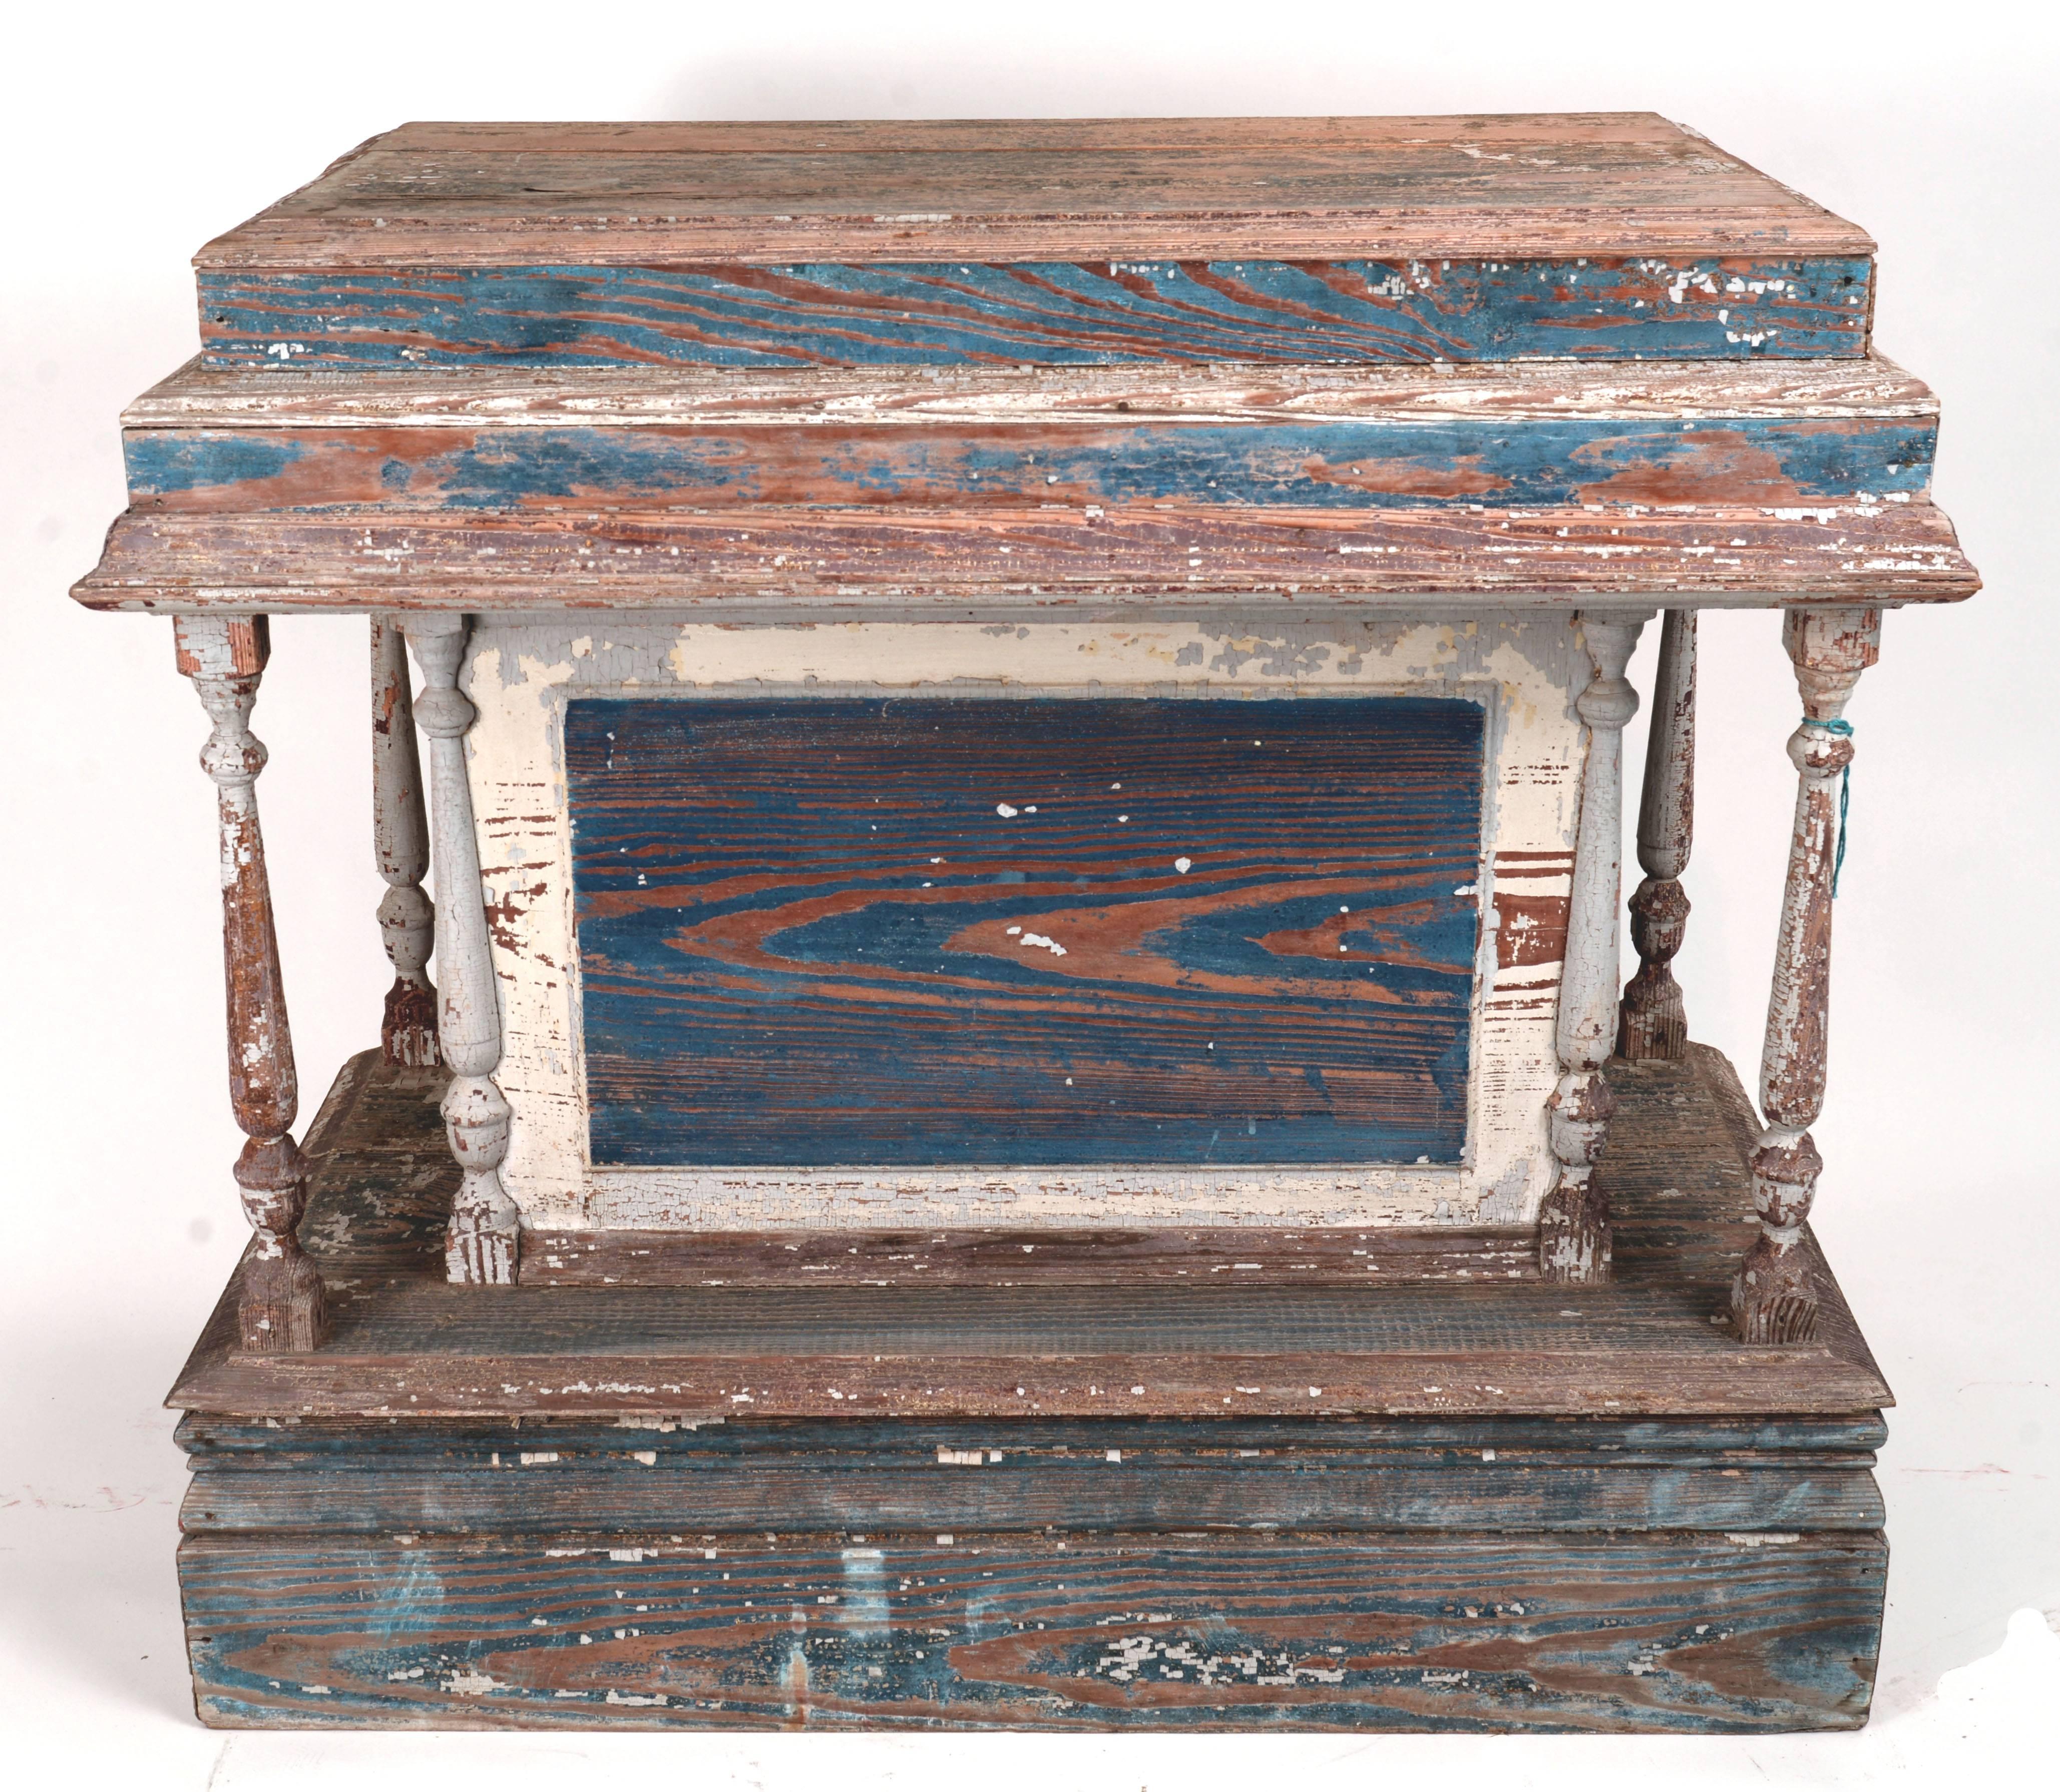 Ornate four spindle two-tier wooden station with blue and white over-paint. The back of this piece is open with two wooden shelves.